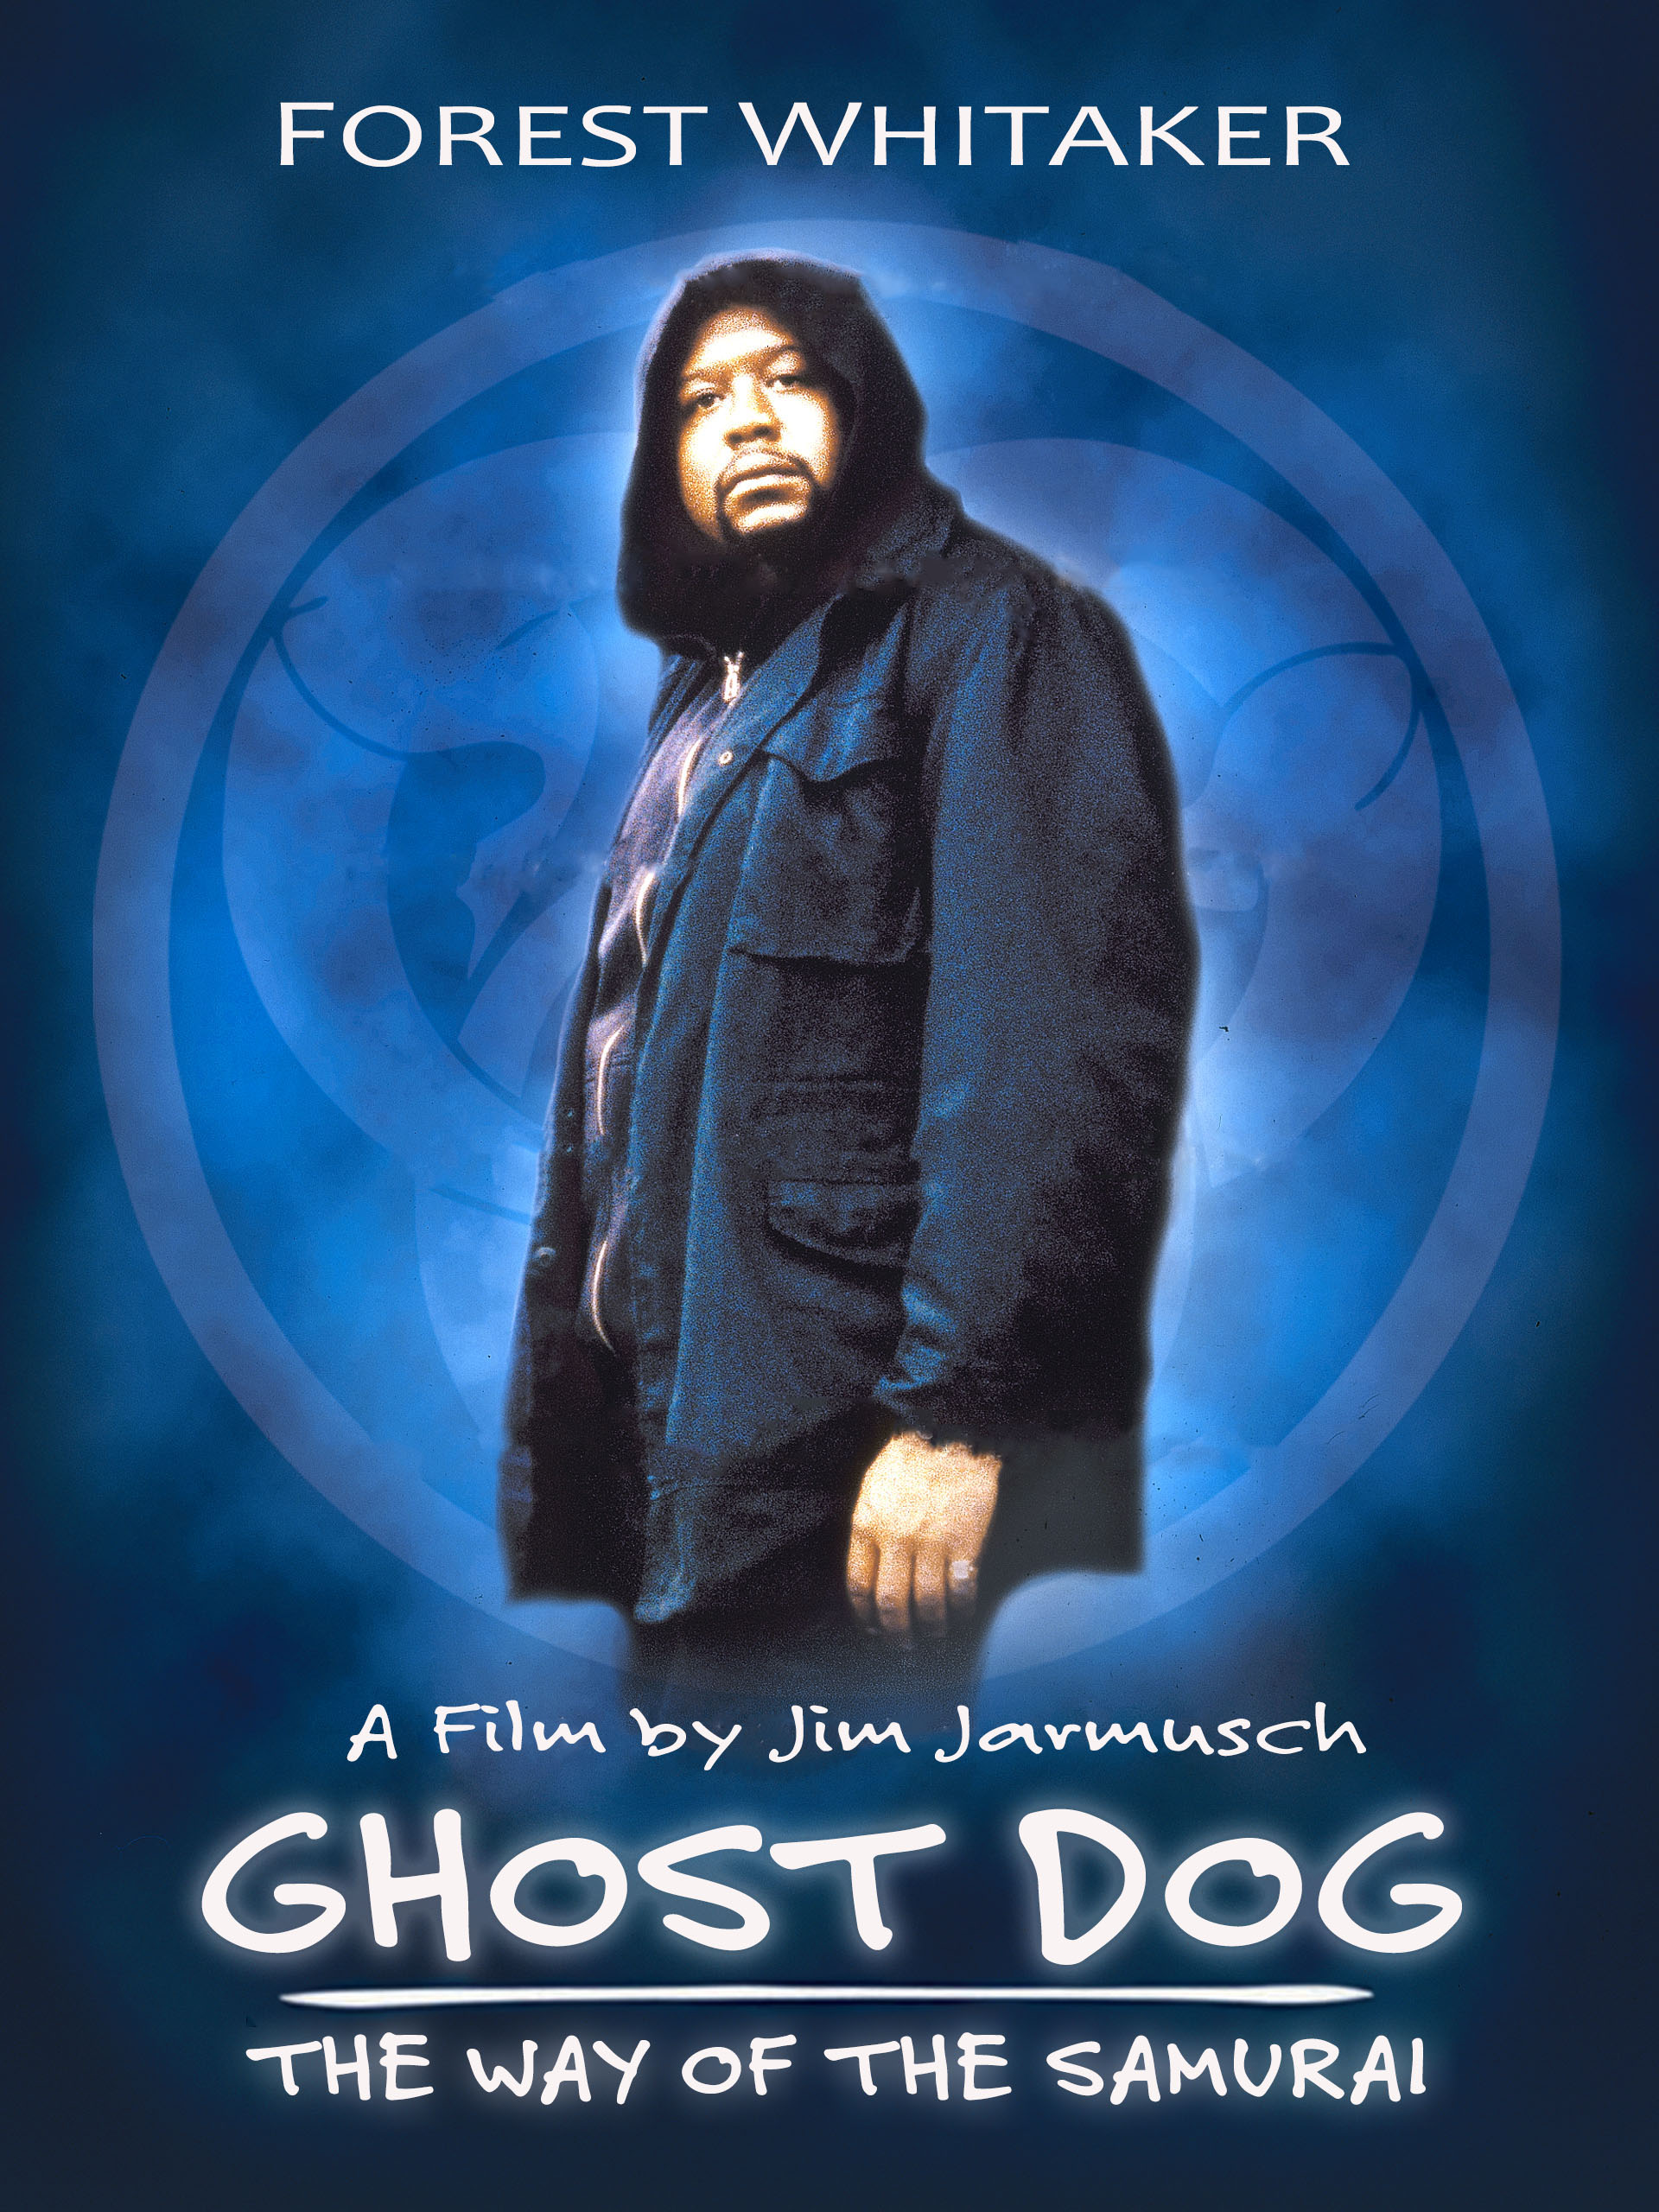 "Ghost Dog: The Way of the Samurai", 1999